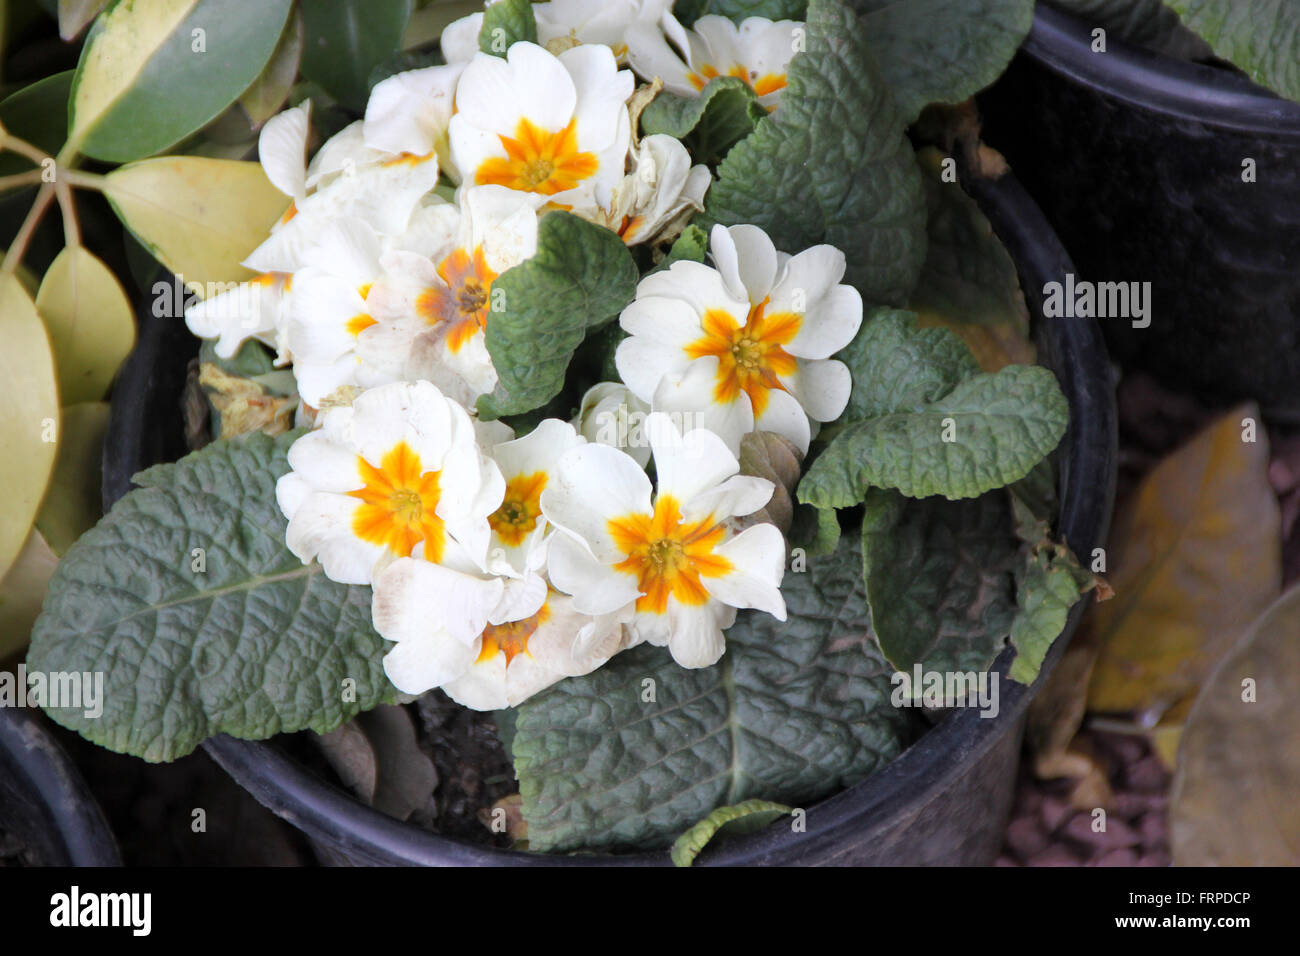 Primuka vulgaris ‘Alba’, cultivated ornamental herb with basal rosette of thick obovate leaves white flowers yellow center Stock Photo